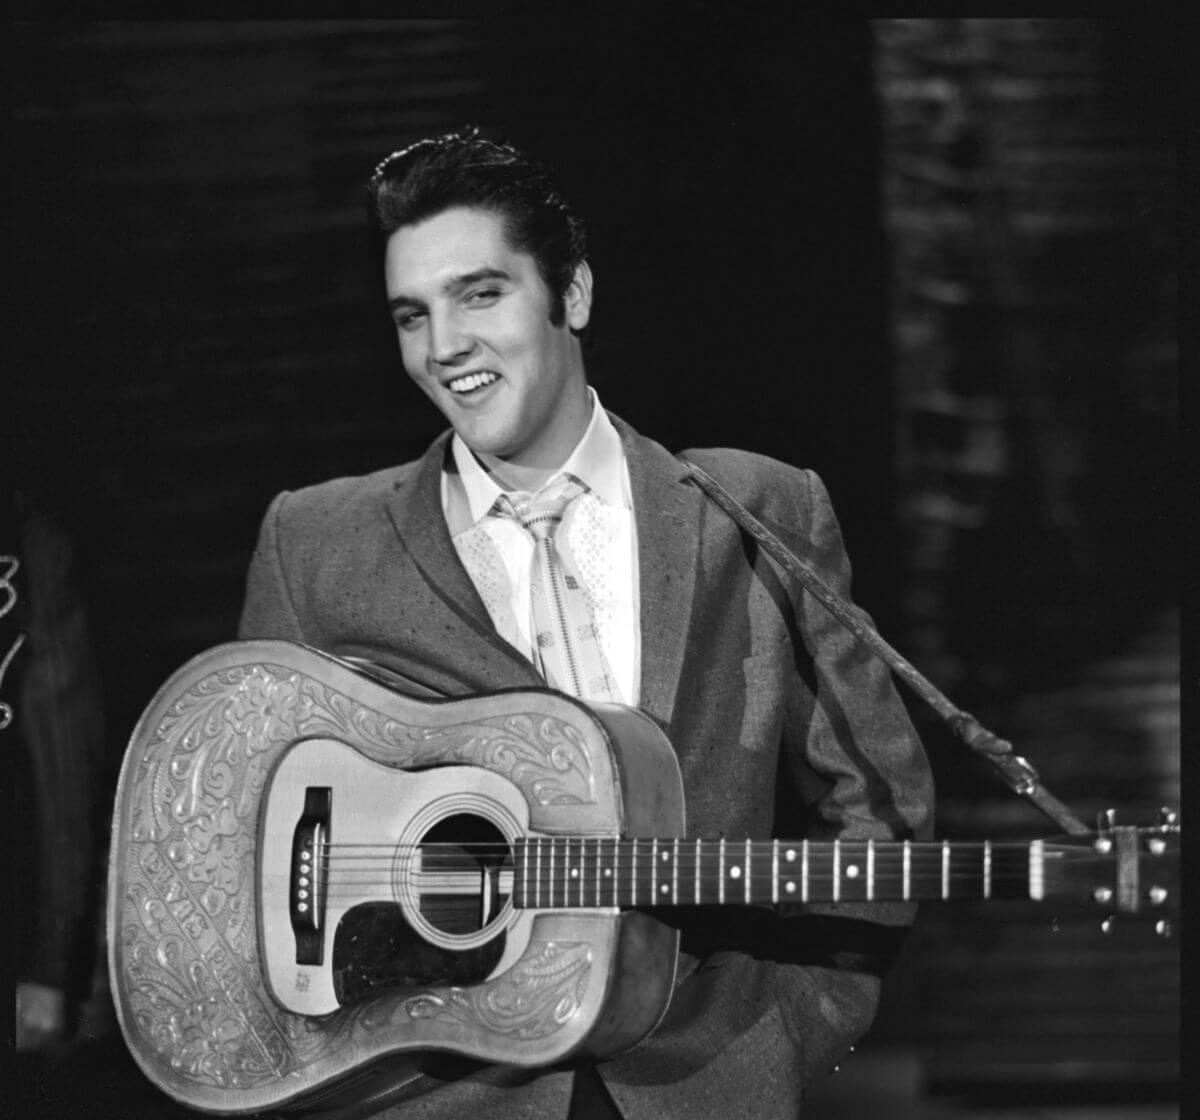 A black and white picture of Elvis Presley holding an acoustic guitar.